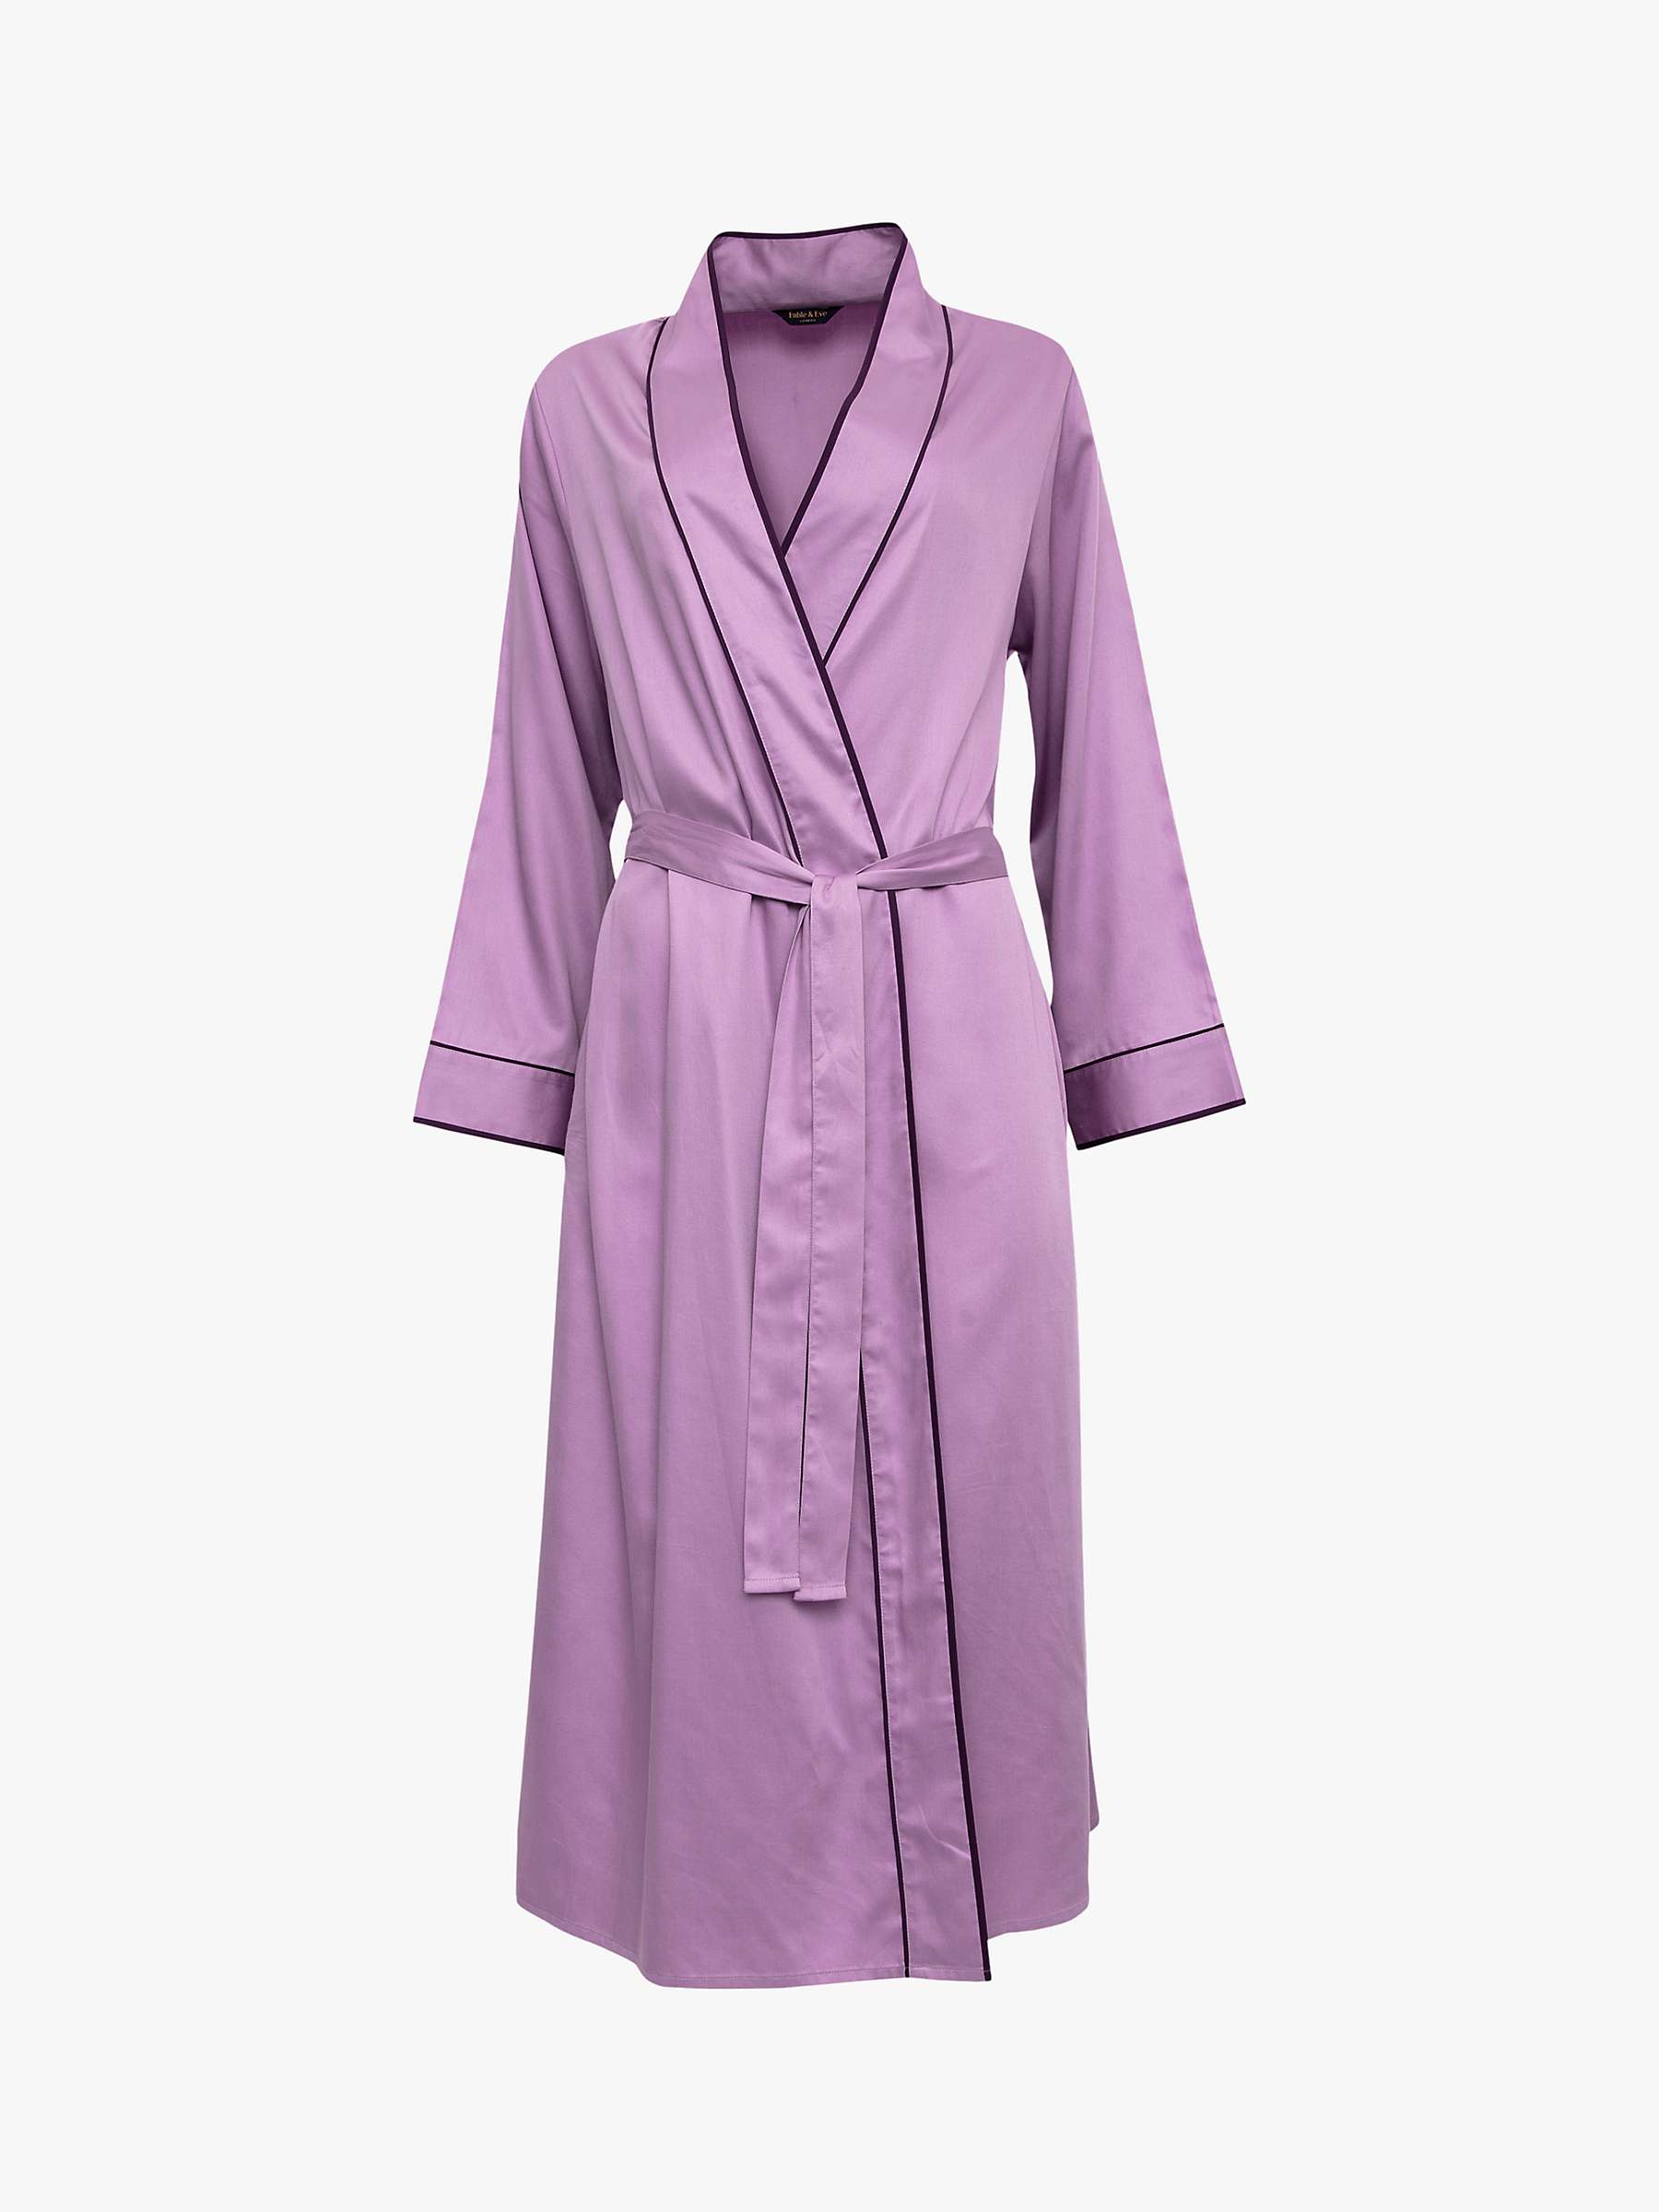 Buy Fable & Eve Wimbledon Solid Dressing Gown, Lilac Online at johnlewis.com